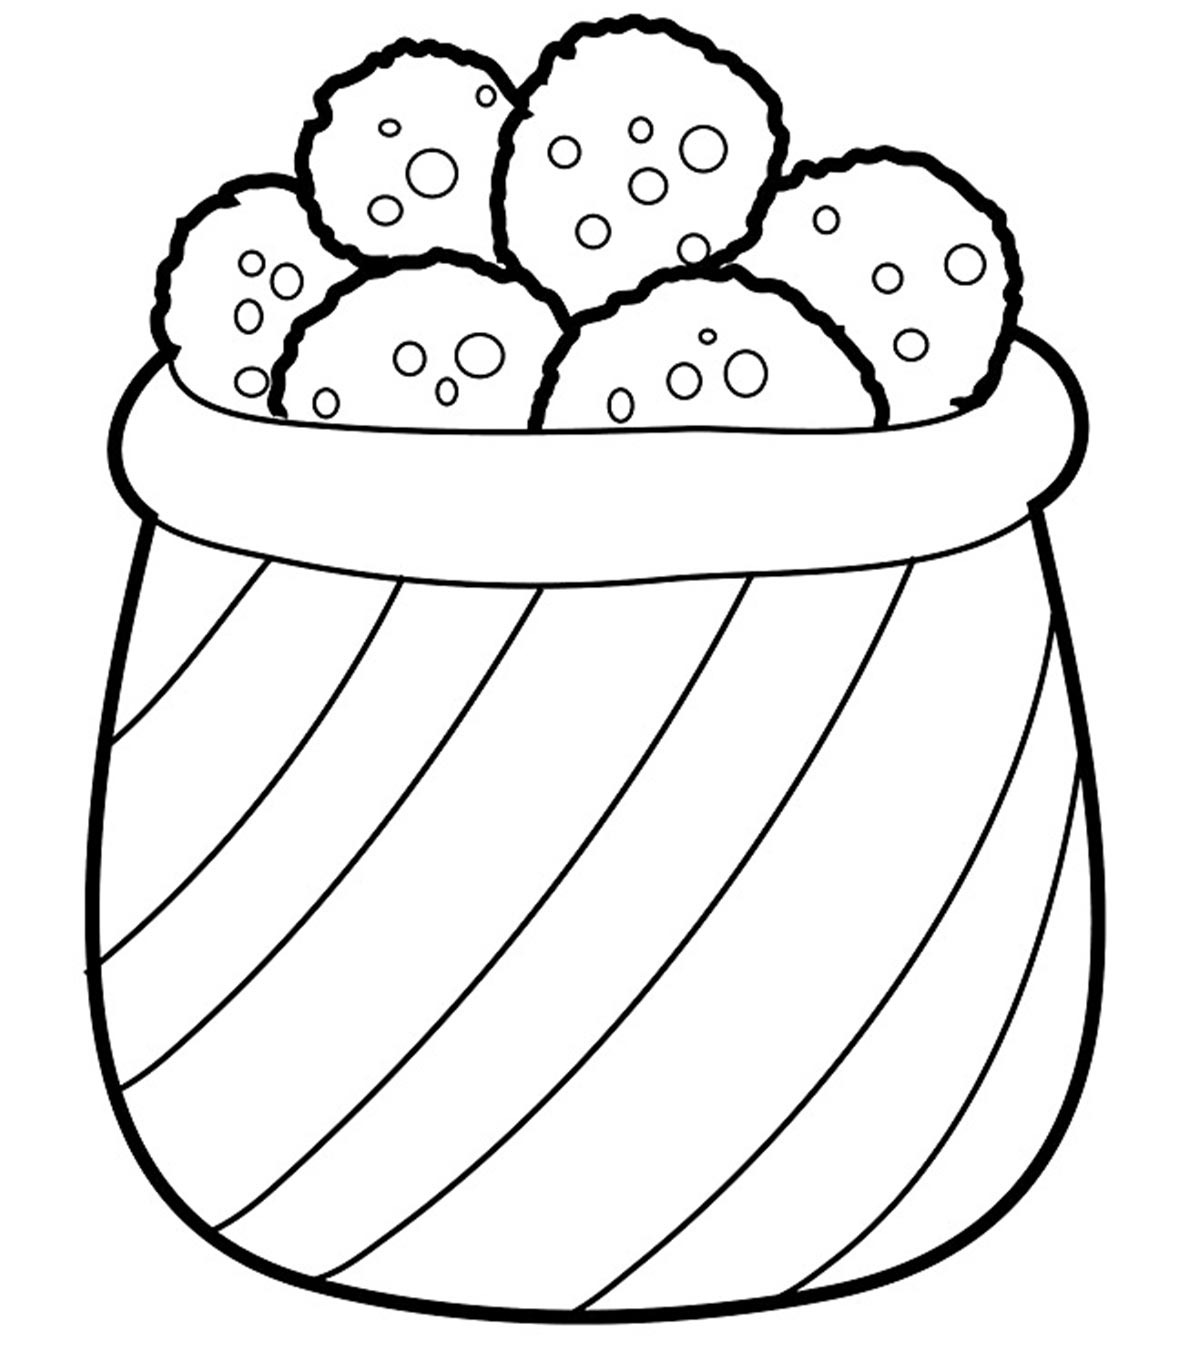 10 Yummy Cookies Coloring Pages For Your Little Ones_image